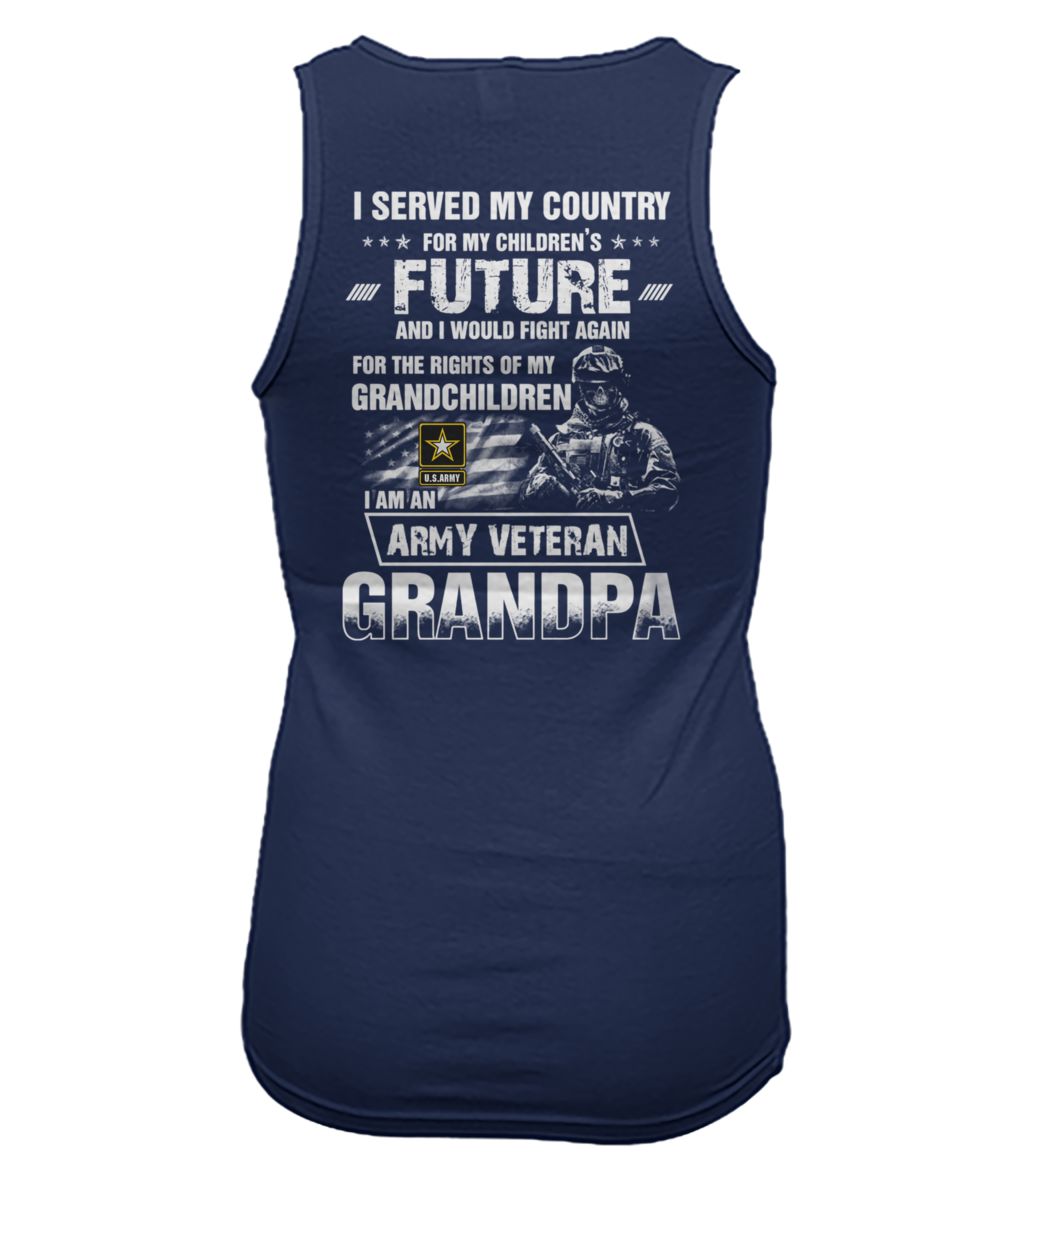 I served my country for my children’s future and I would fight again I am an army veteran grandpa U.S. army soldier women's tank top